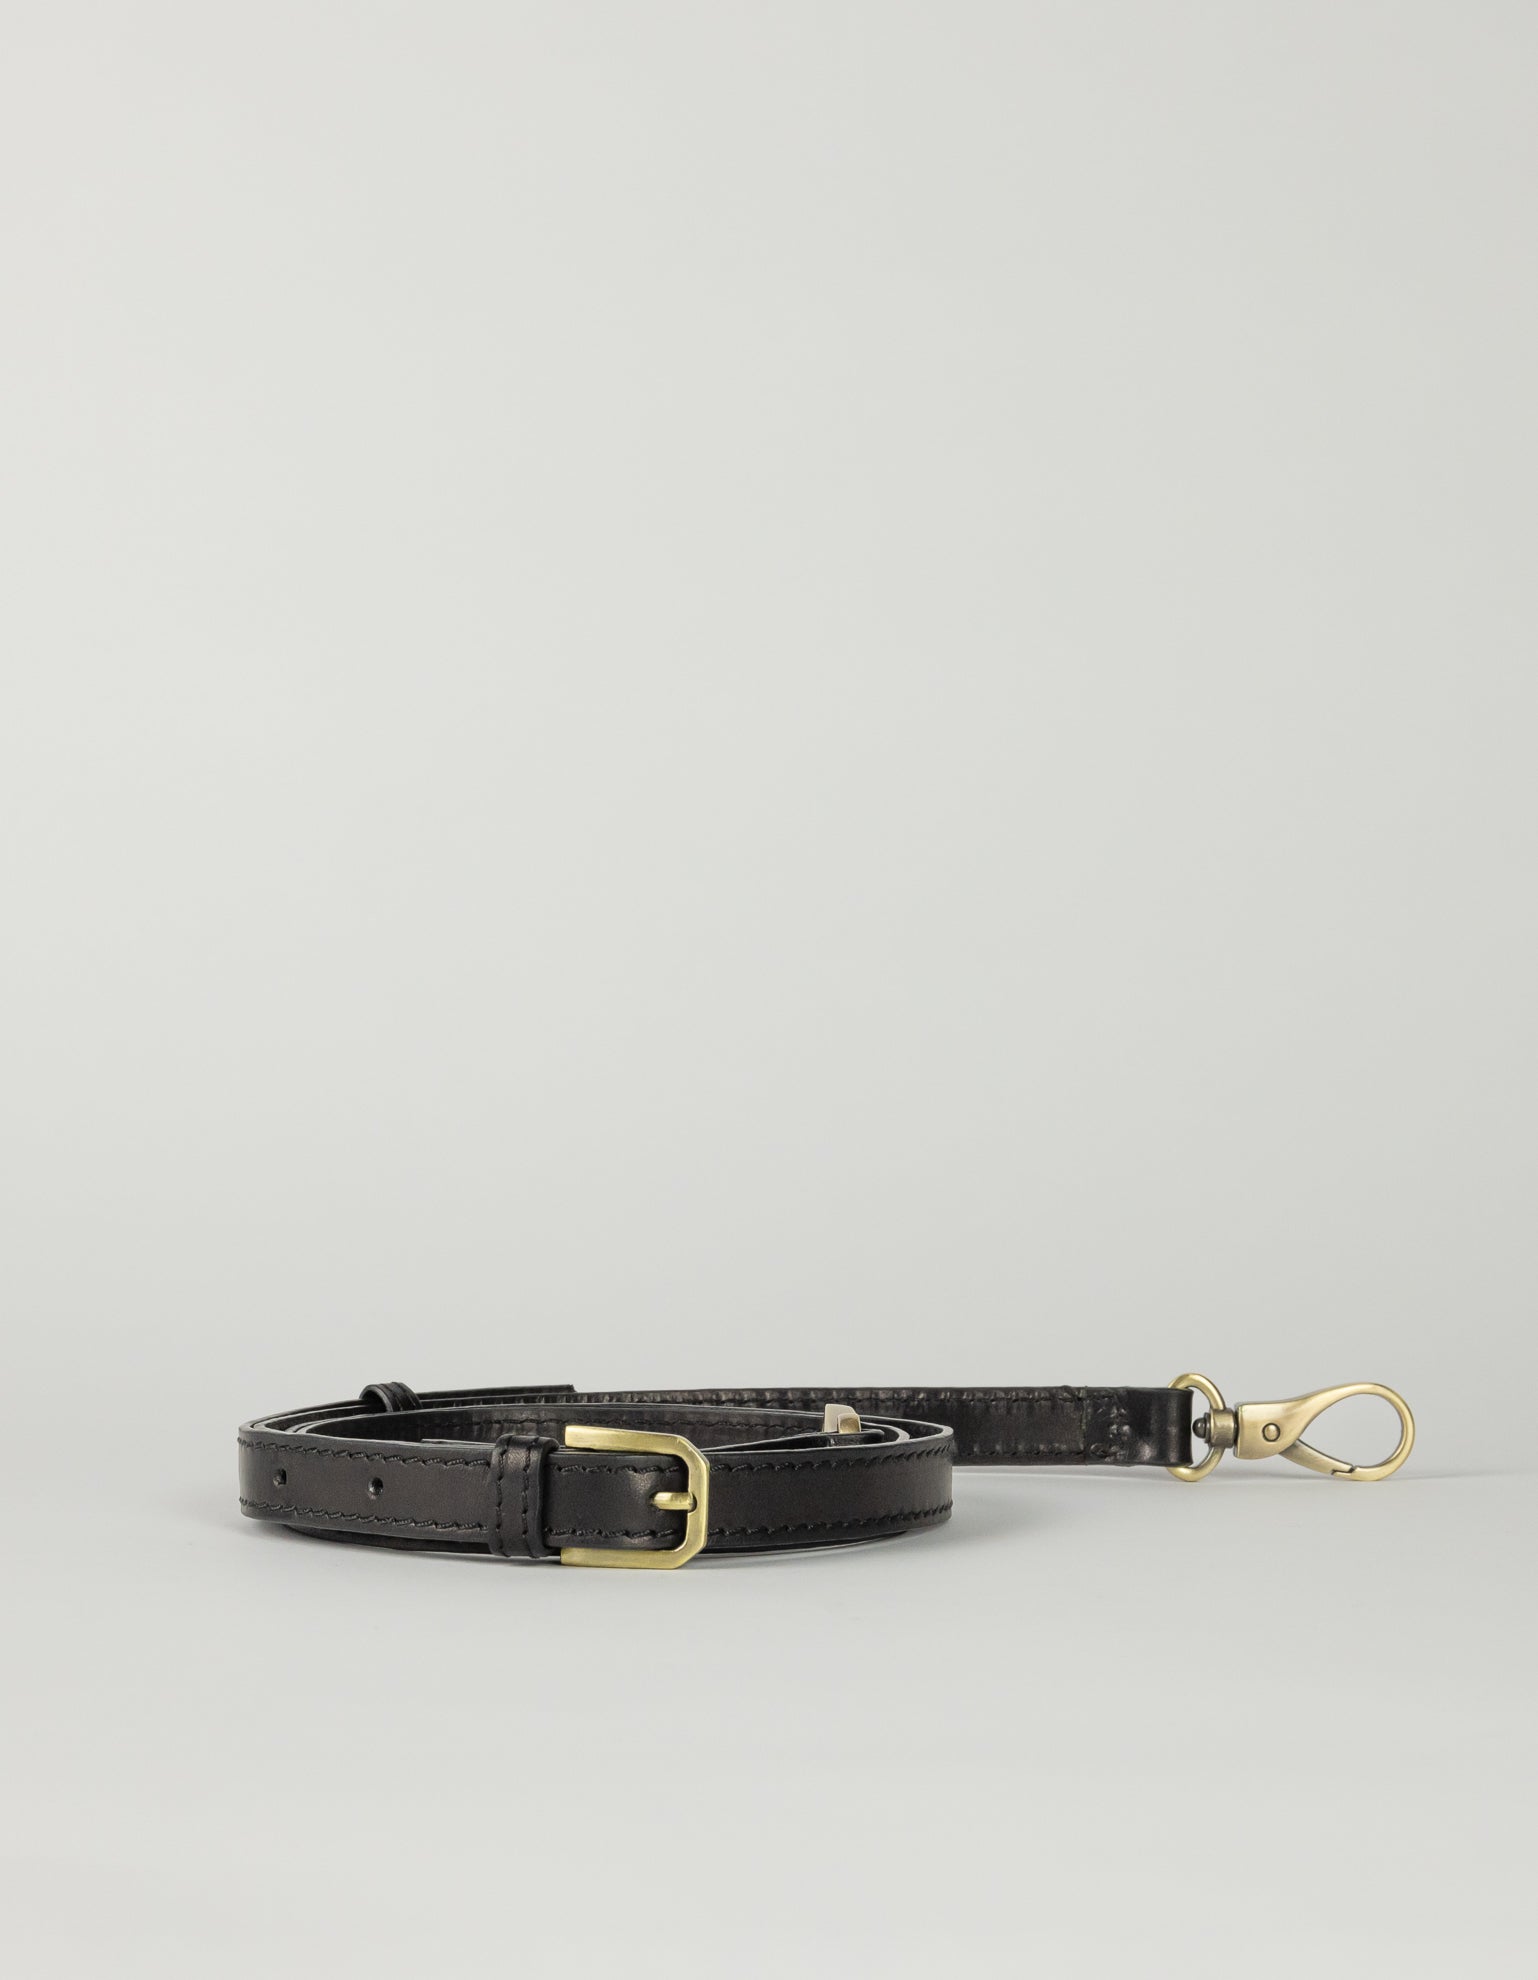 Black leather crossbody strap, rolled